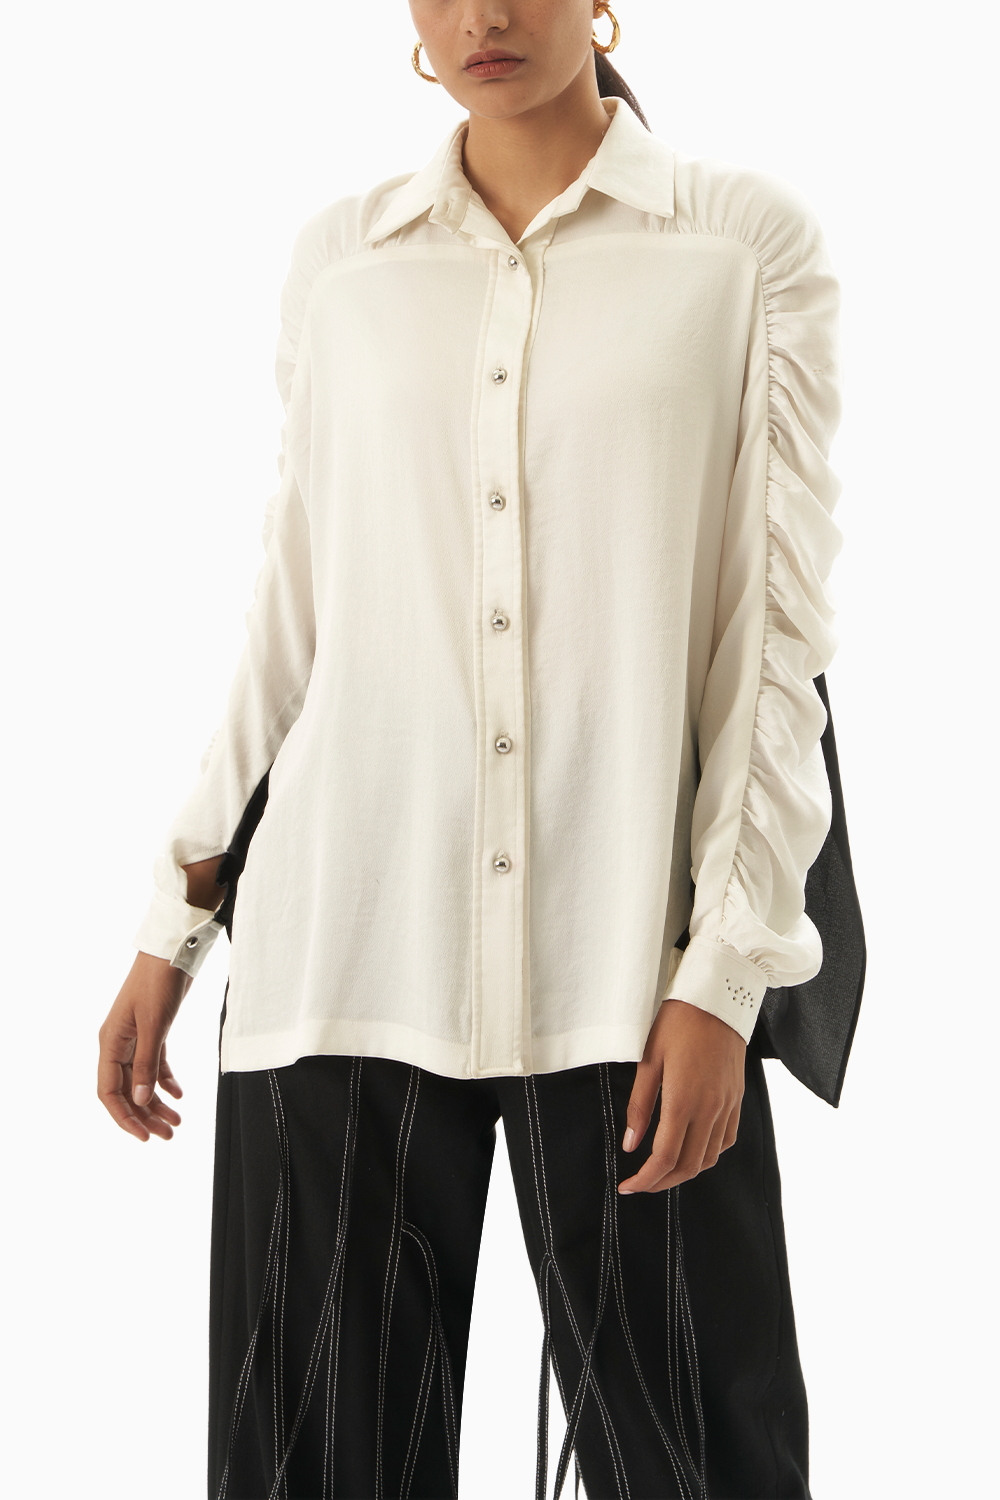 Monochrome People Embroidery Shirt